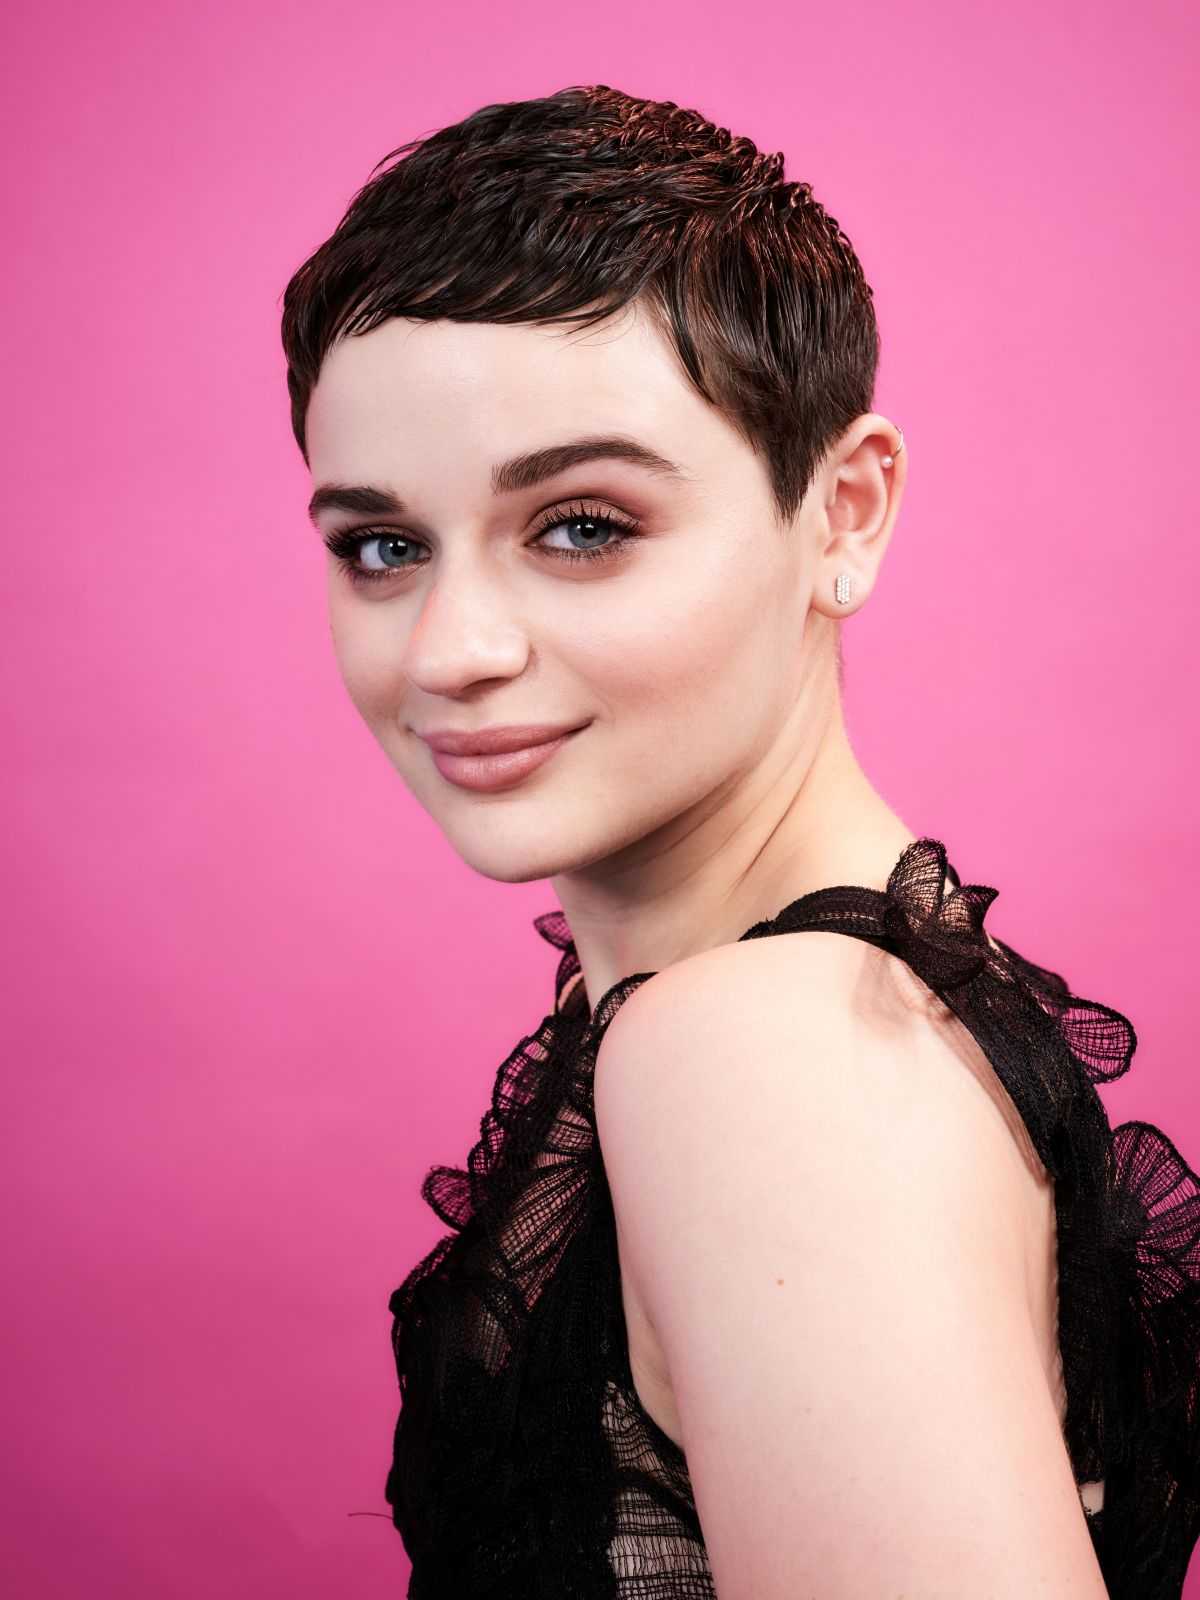 70+ Hot And Sexy Pictures Of Joey King Exposes Her Curvy Body 5